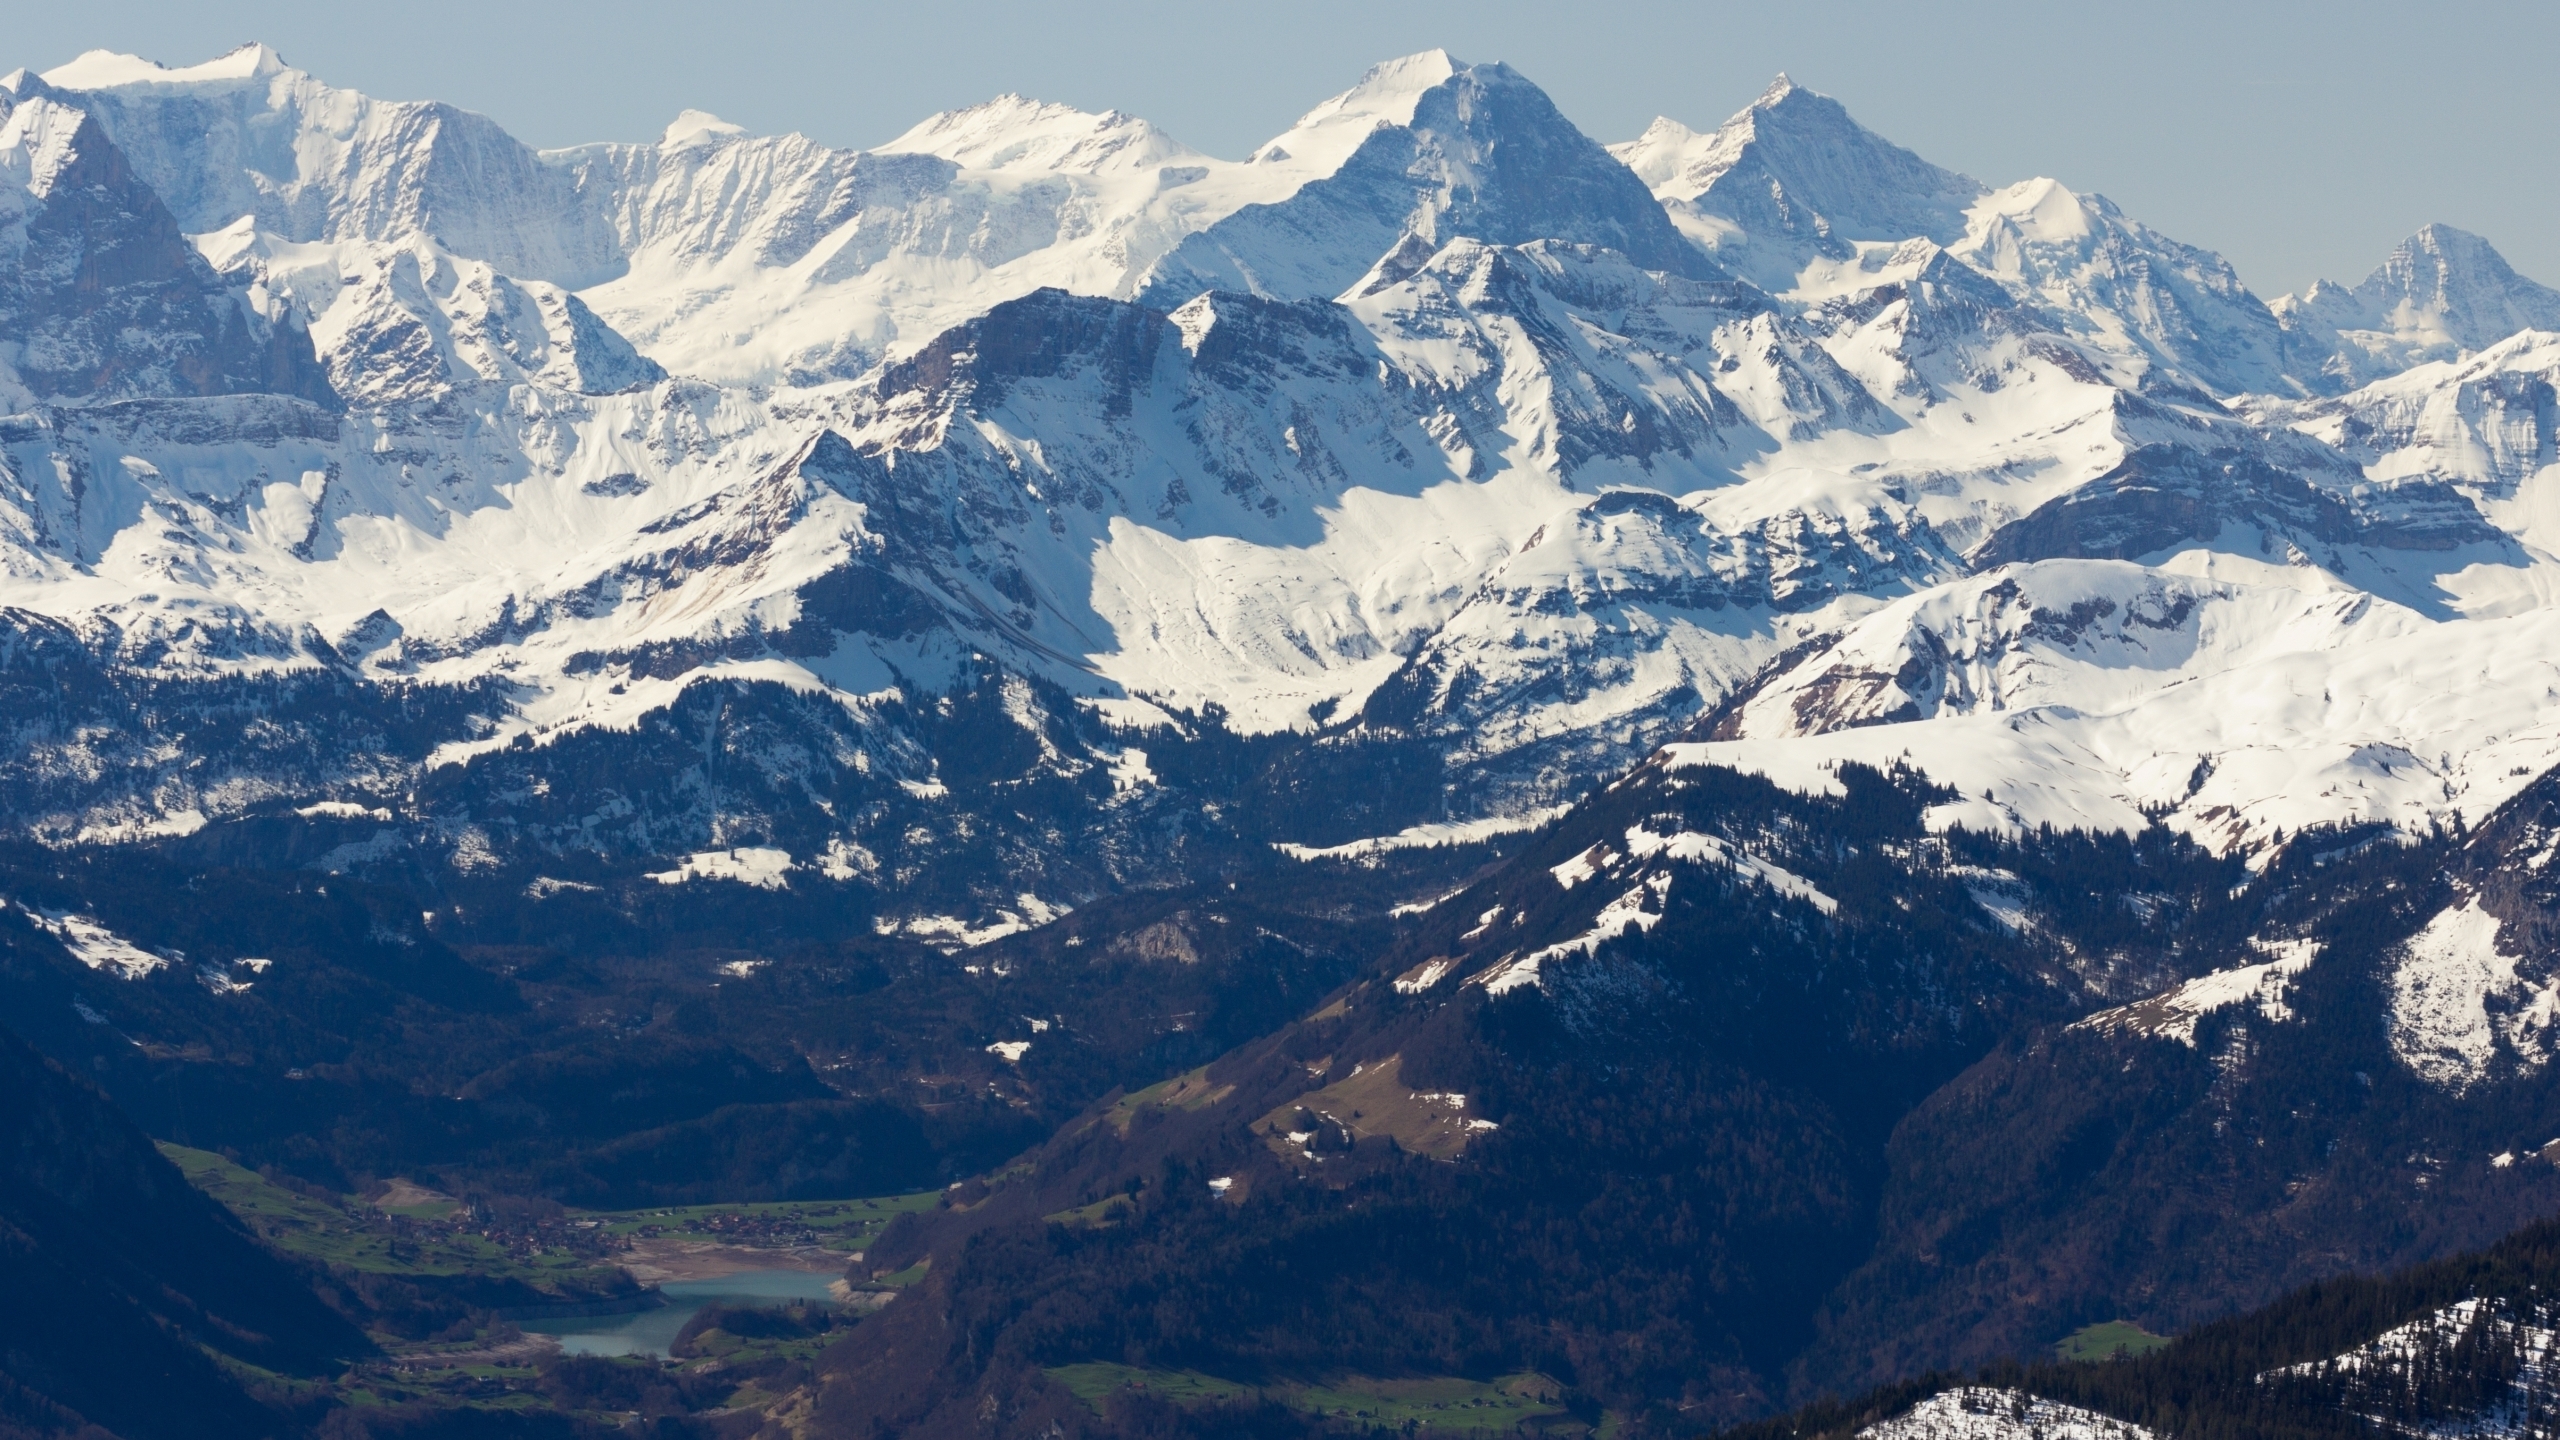 The Alps for 2560x1440 HDTV resolution